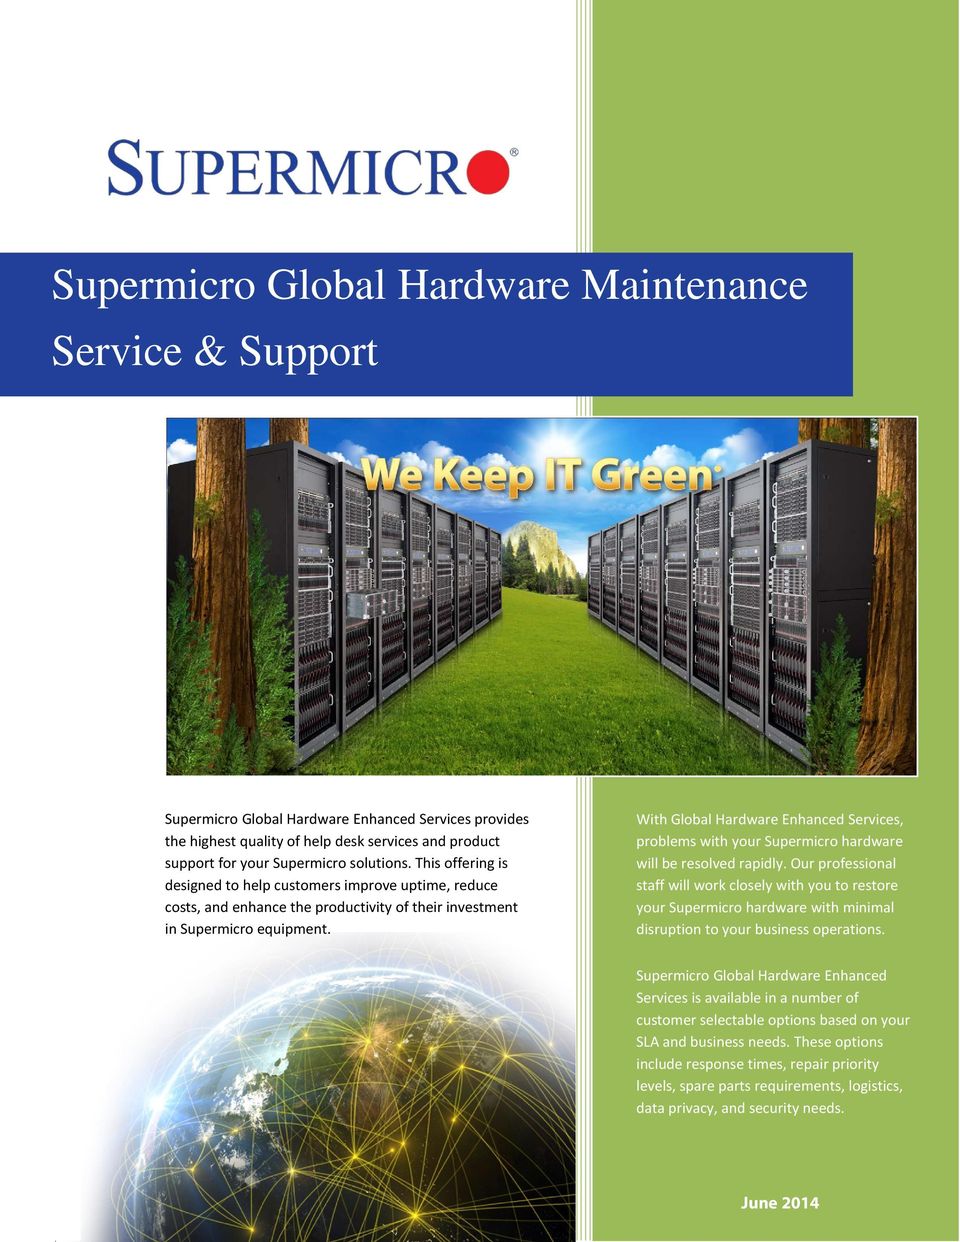 With Global Hardware Enhanced Services, problems with your Supermicro hardware will be resolved rapidly.